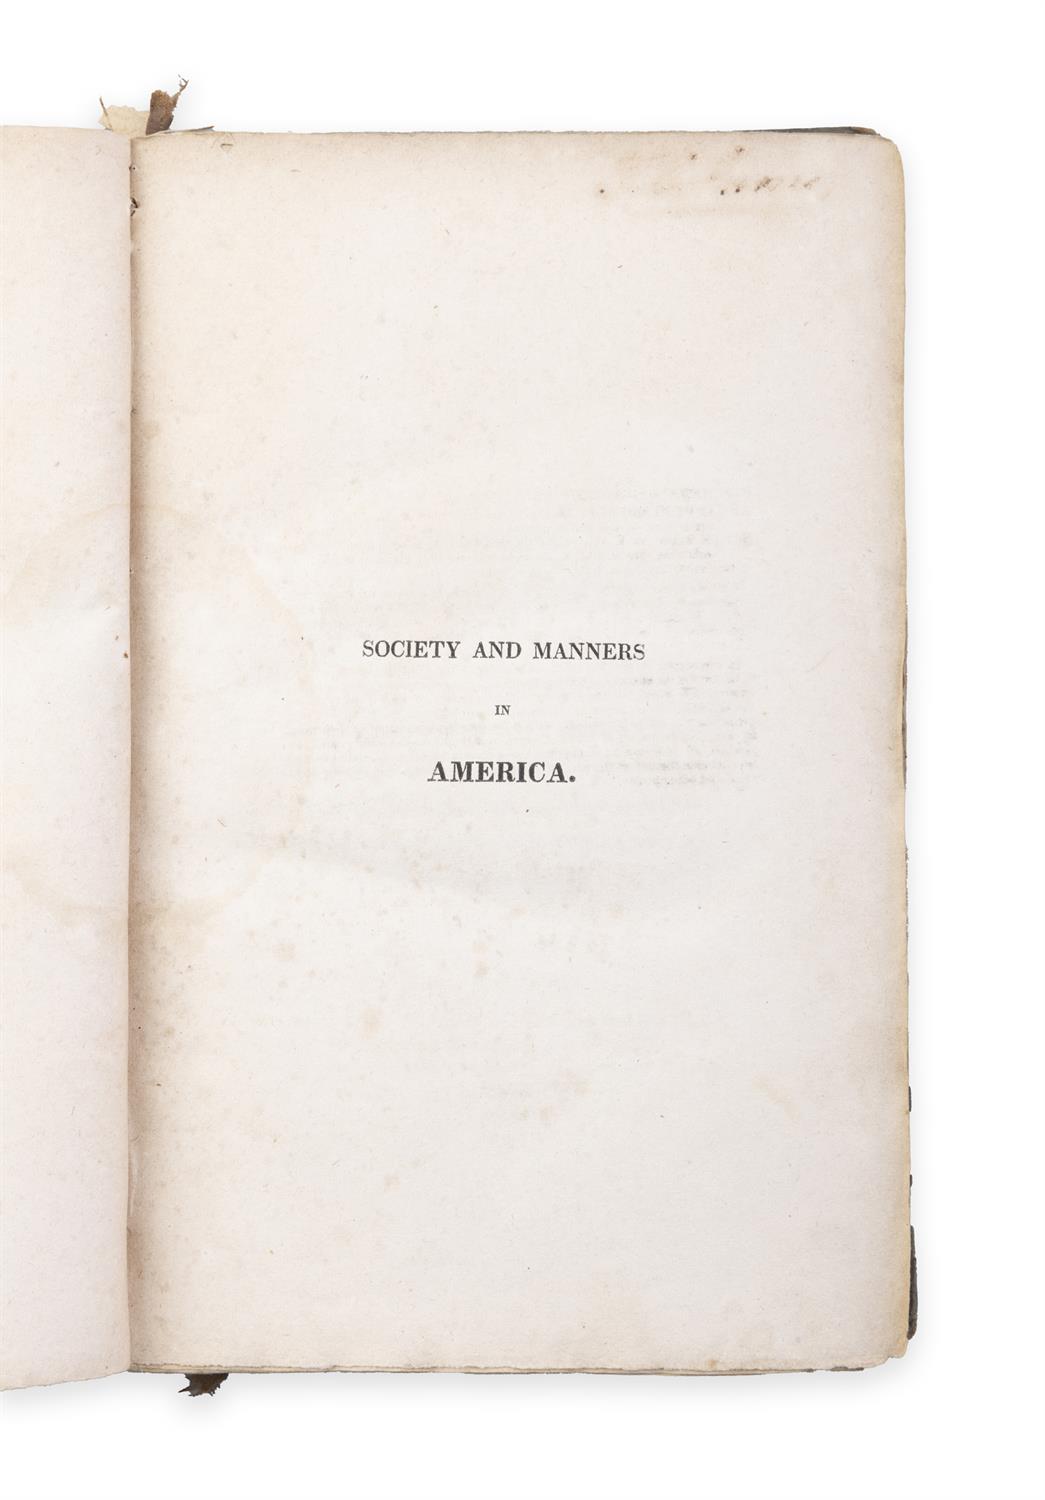 [FRANCIS WRIGHT] Views of Society and Manners in America...by an Englishwoman, - Image 4 of 5